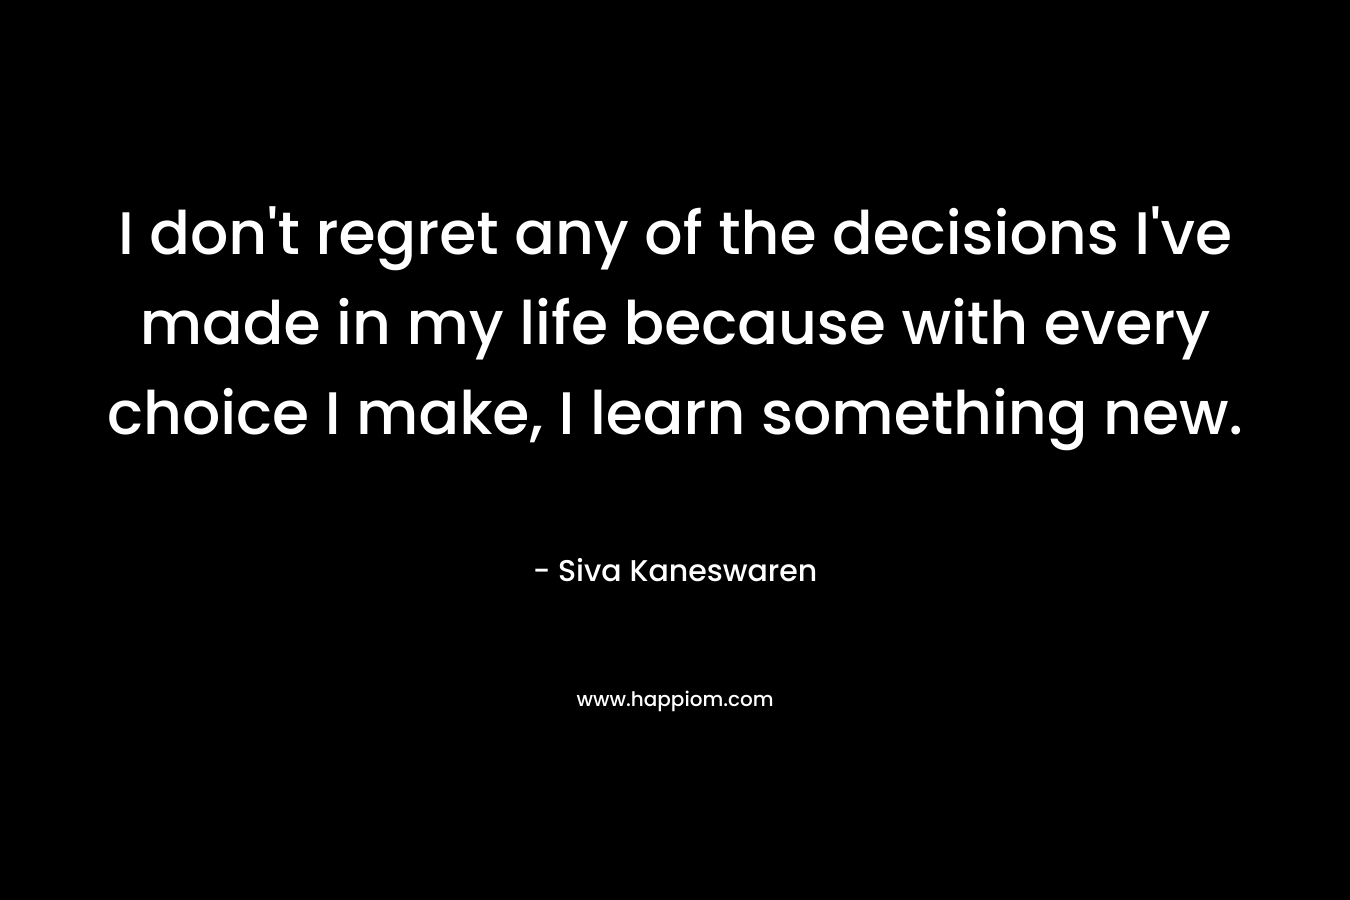 I don’t regret any of the decisions I’ve made in my life because with every choice I make, I learn something new. – Siva Kaneswaren